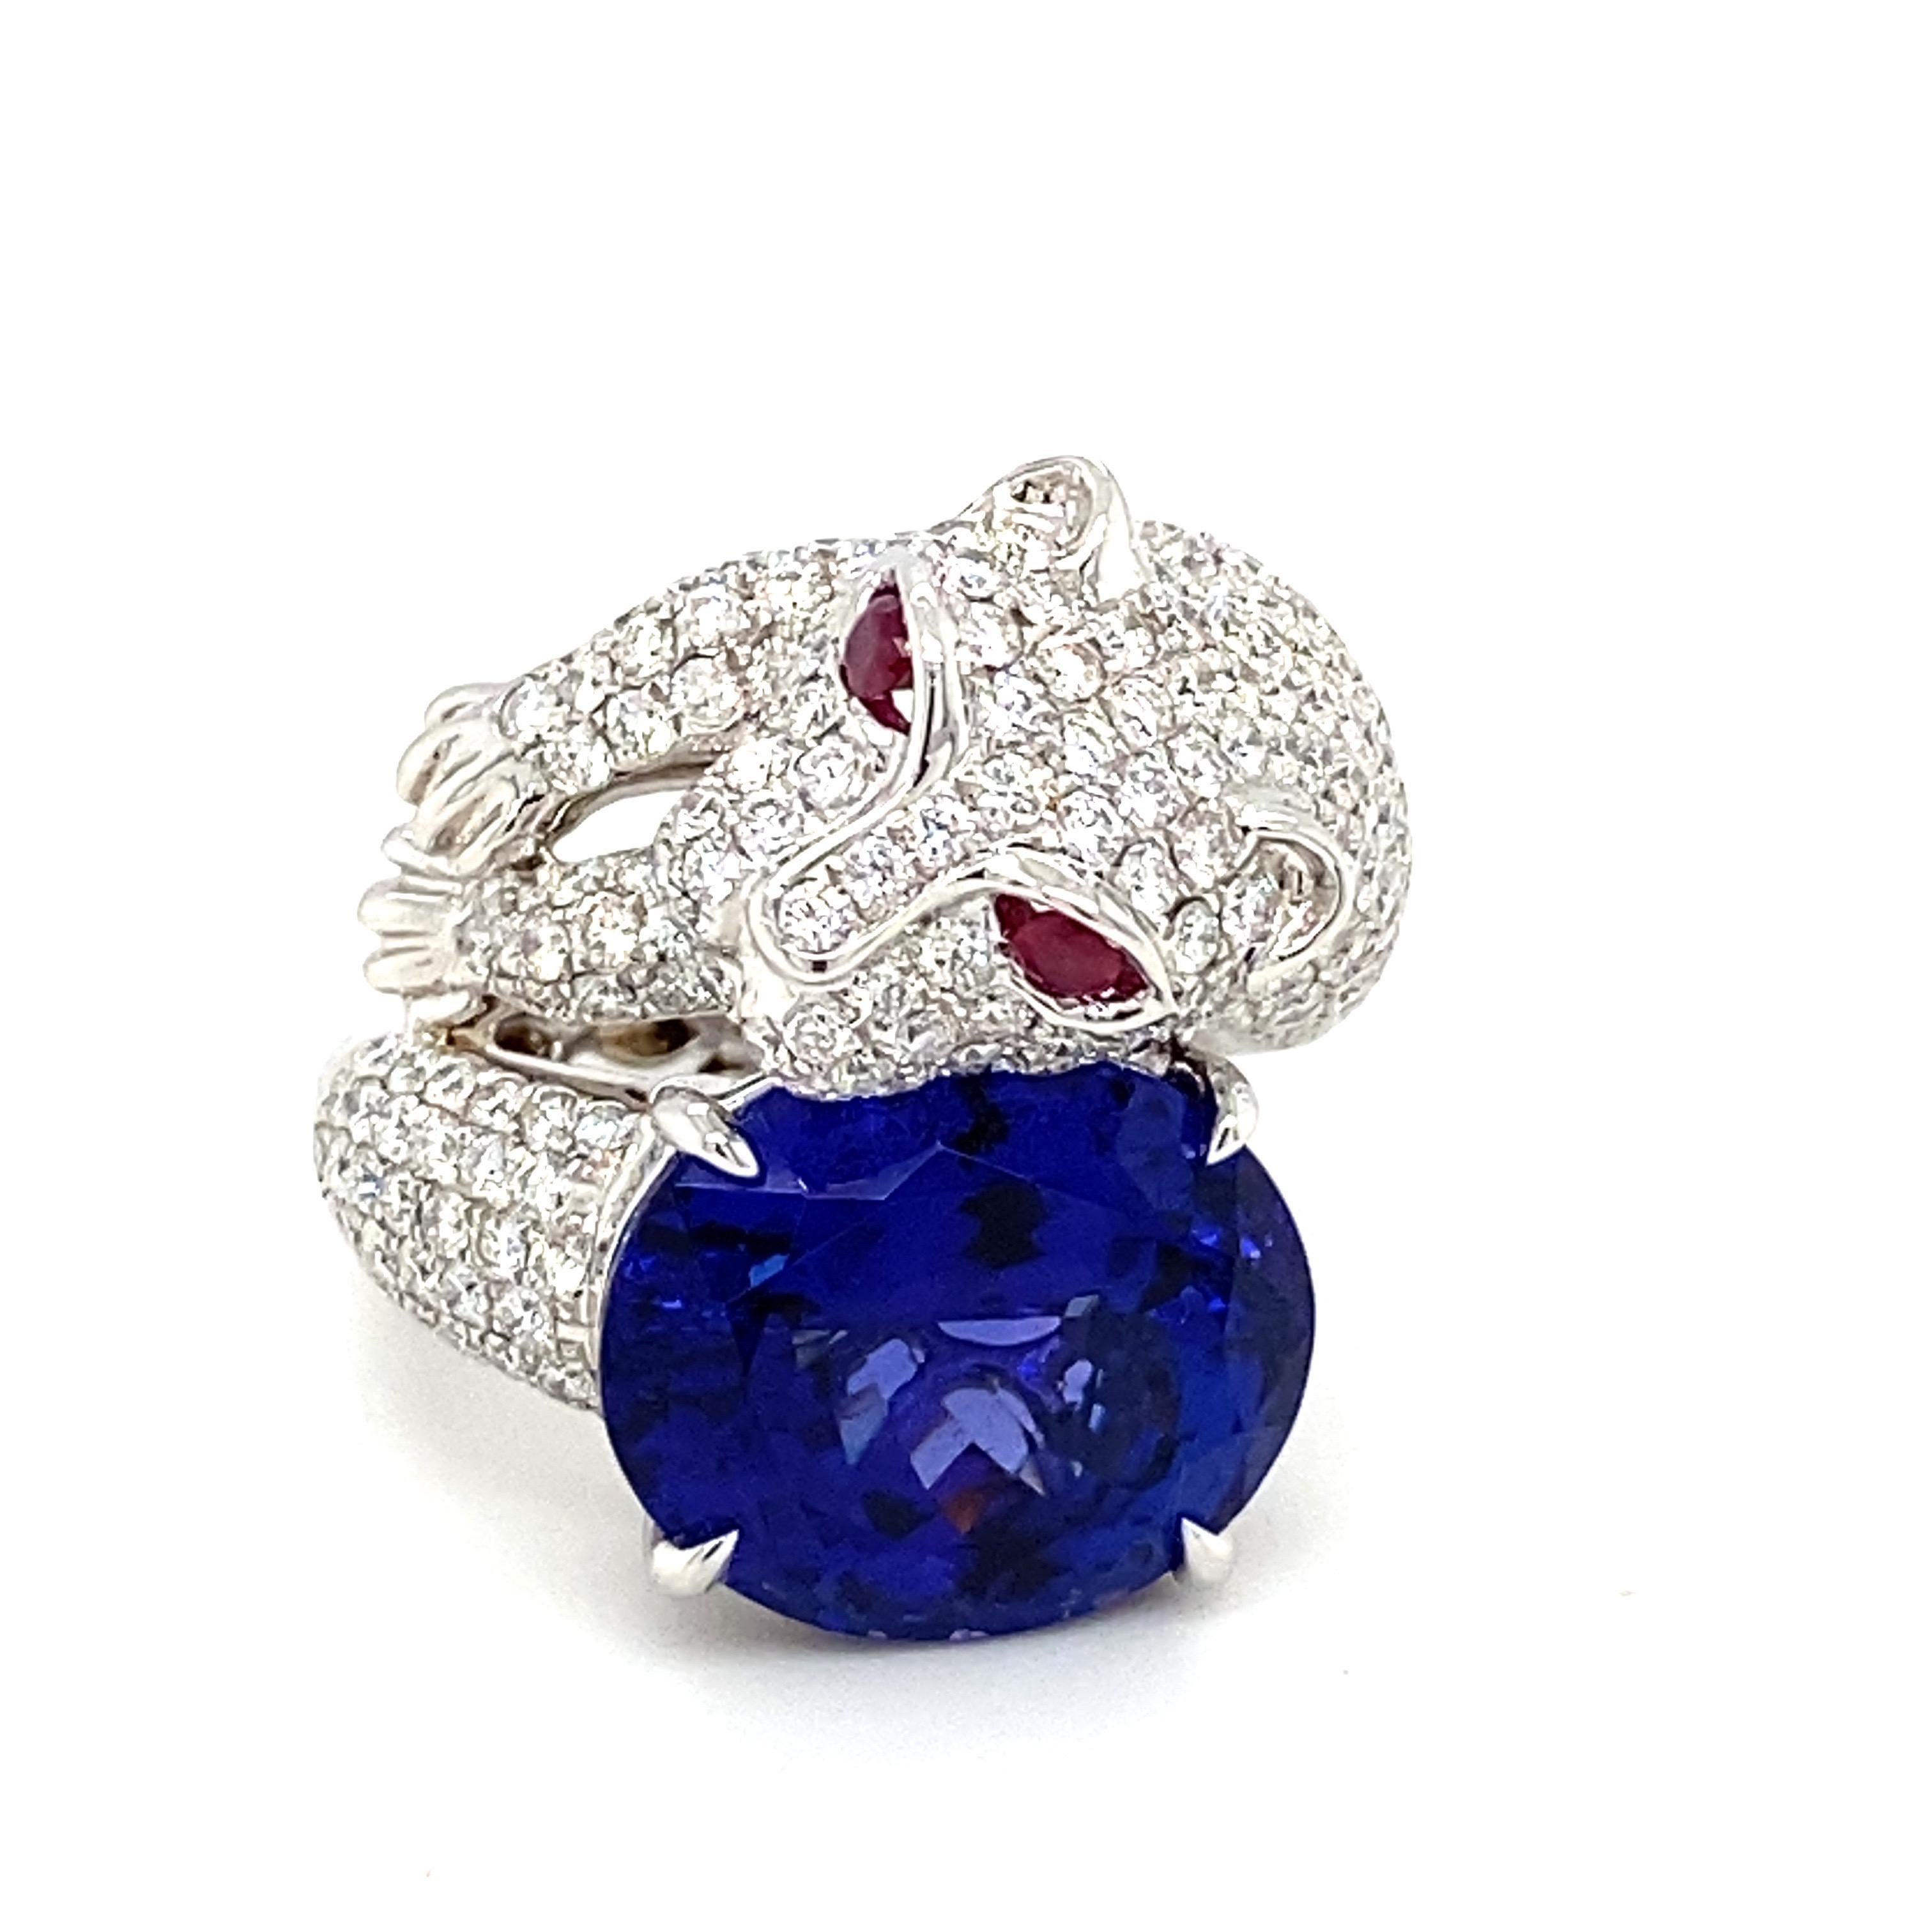 White Gold panther ring is set with brilliant cut diamonds. The panther is holding an oval tanzanite and eyes are ruby. Meticulously crafted to embody a genuine masterpiece.
Tanzanite: 14.44 carat
Diamond & Ruby: 3.92 carat
Gold: 18K White
Size: 7